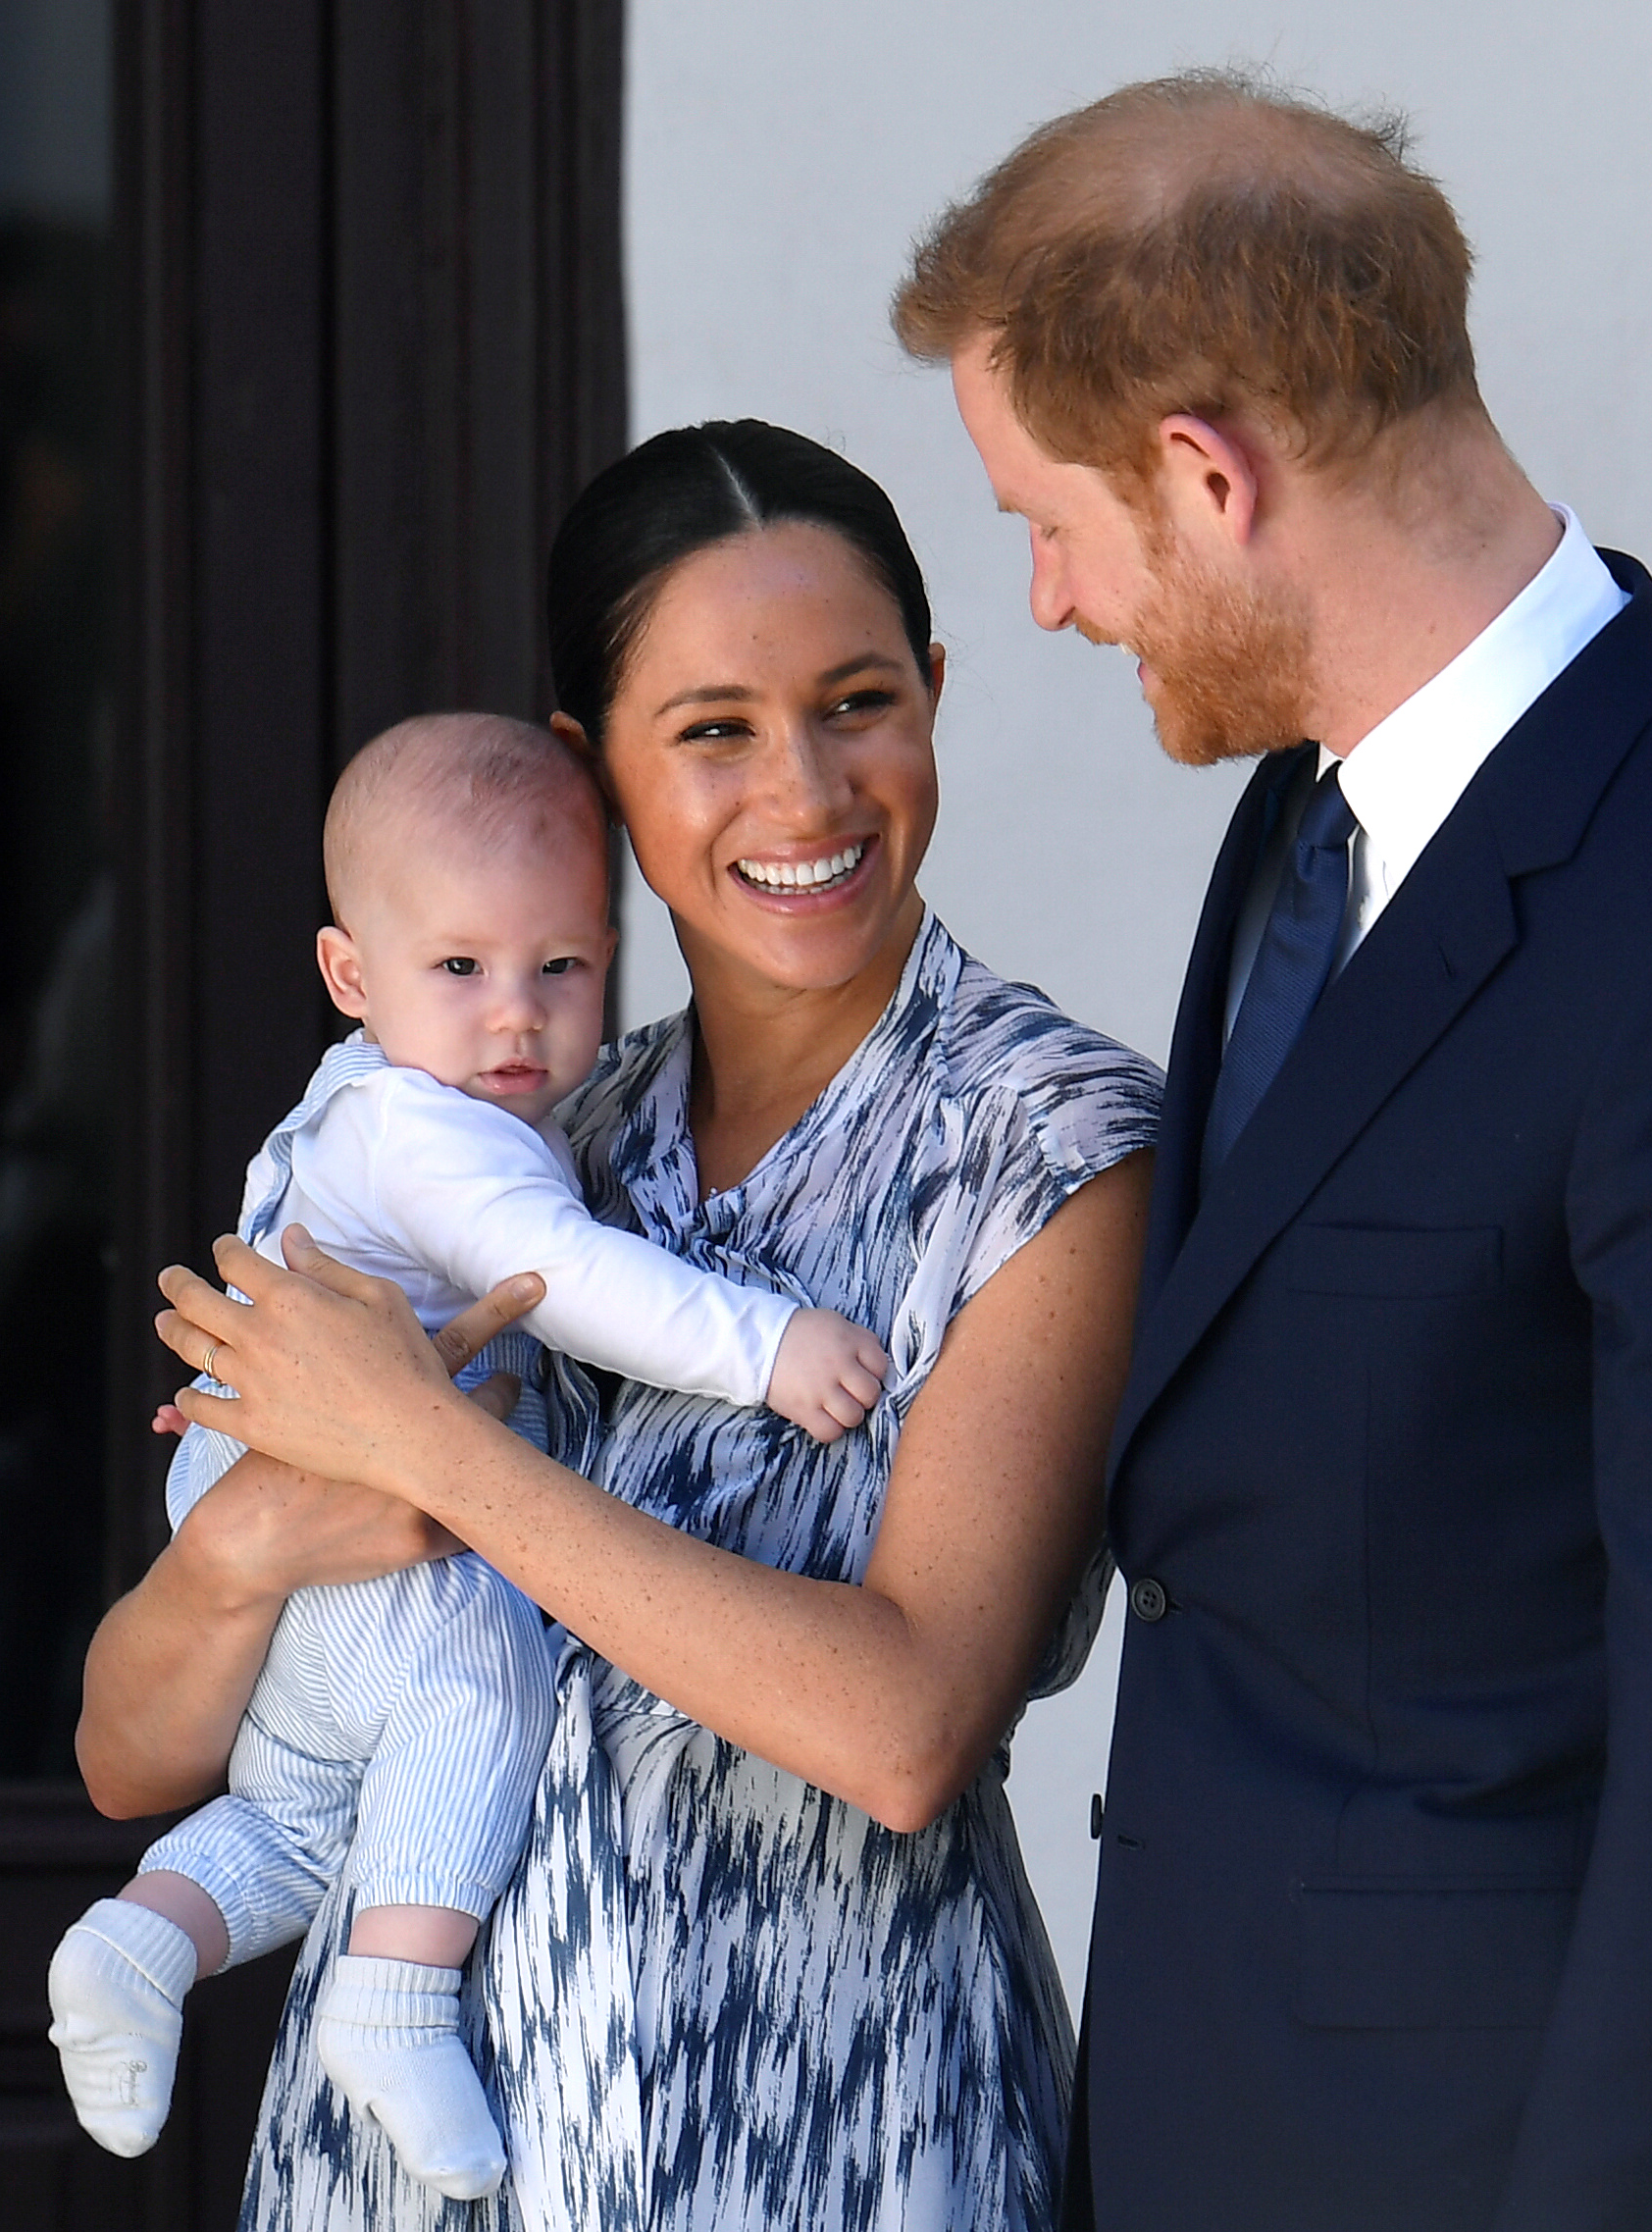 Prince Harry and Meghan Markle with their son Archie in South Africa in 2019 | Source: Getty Images